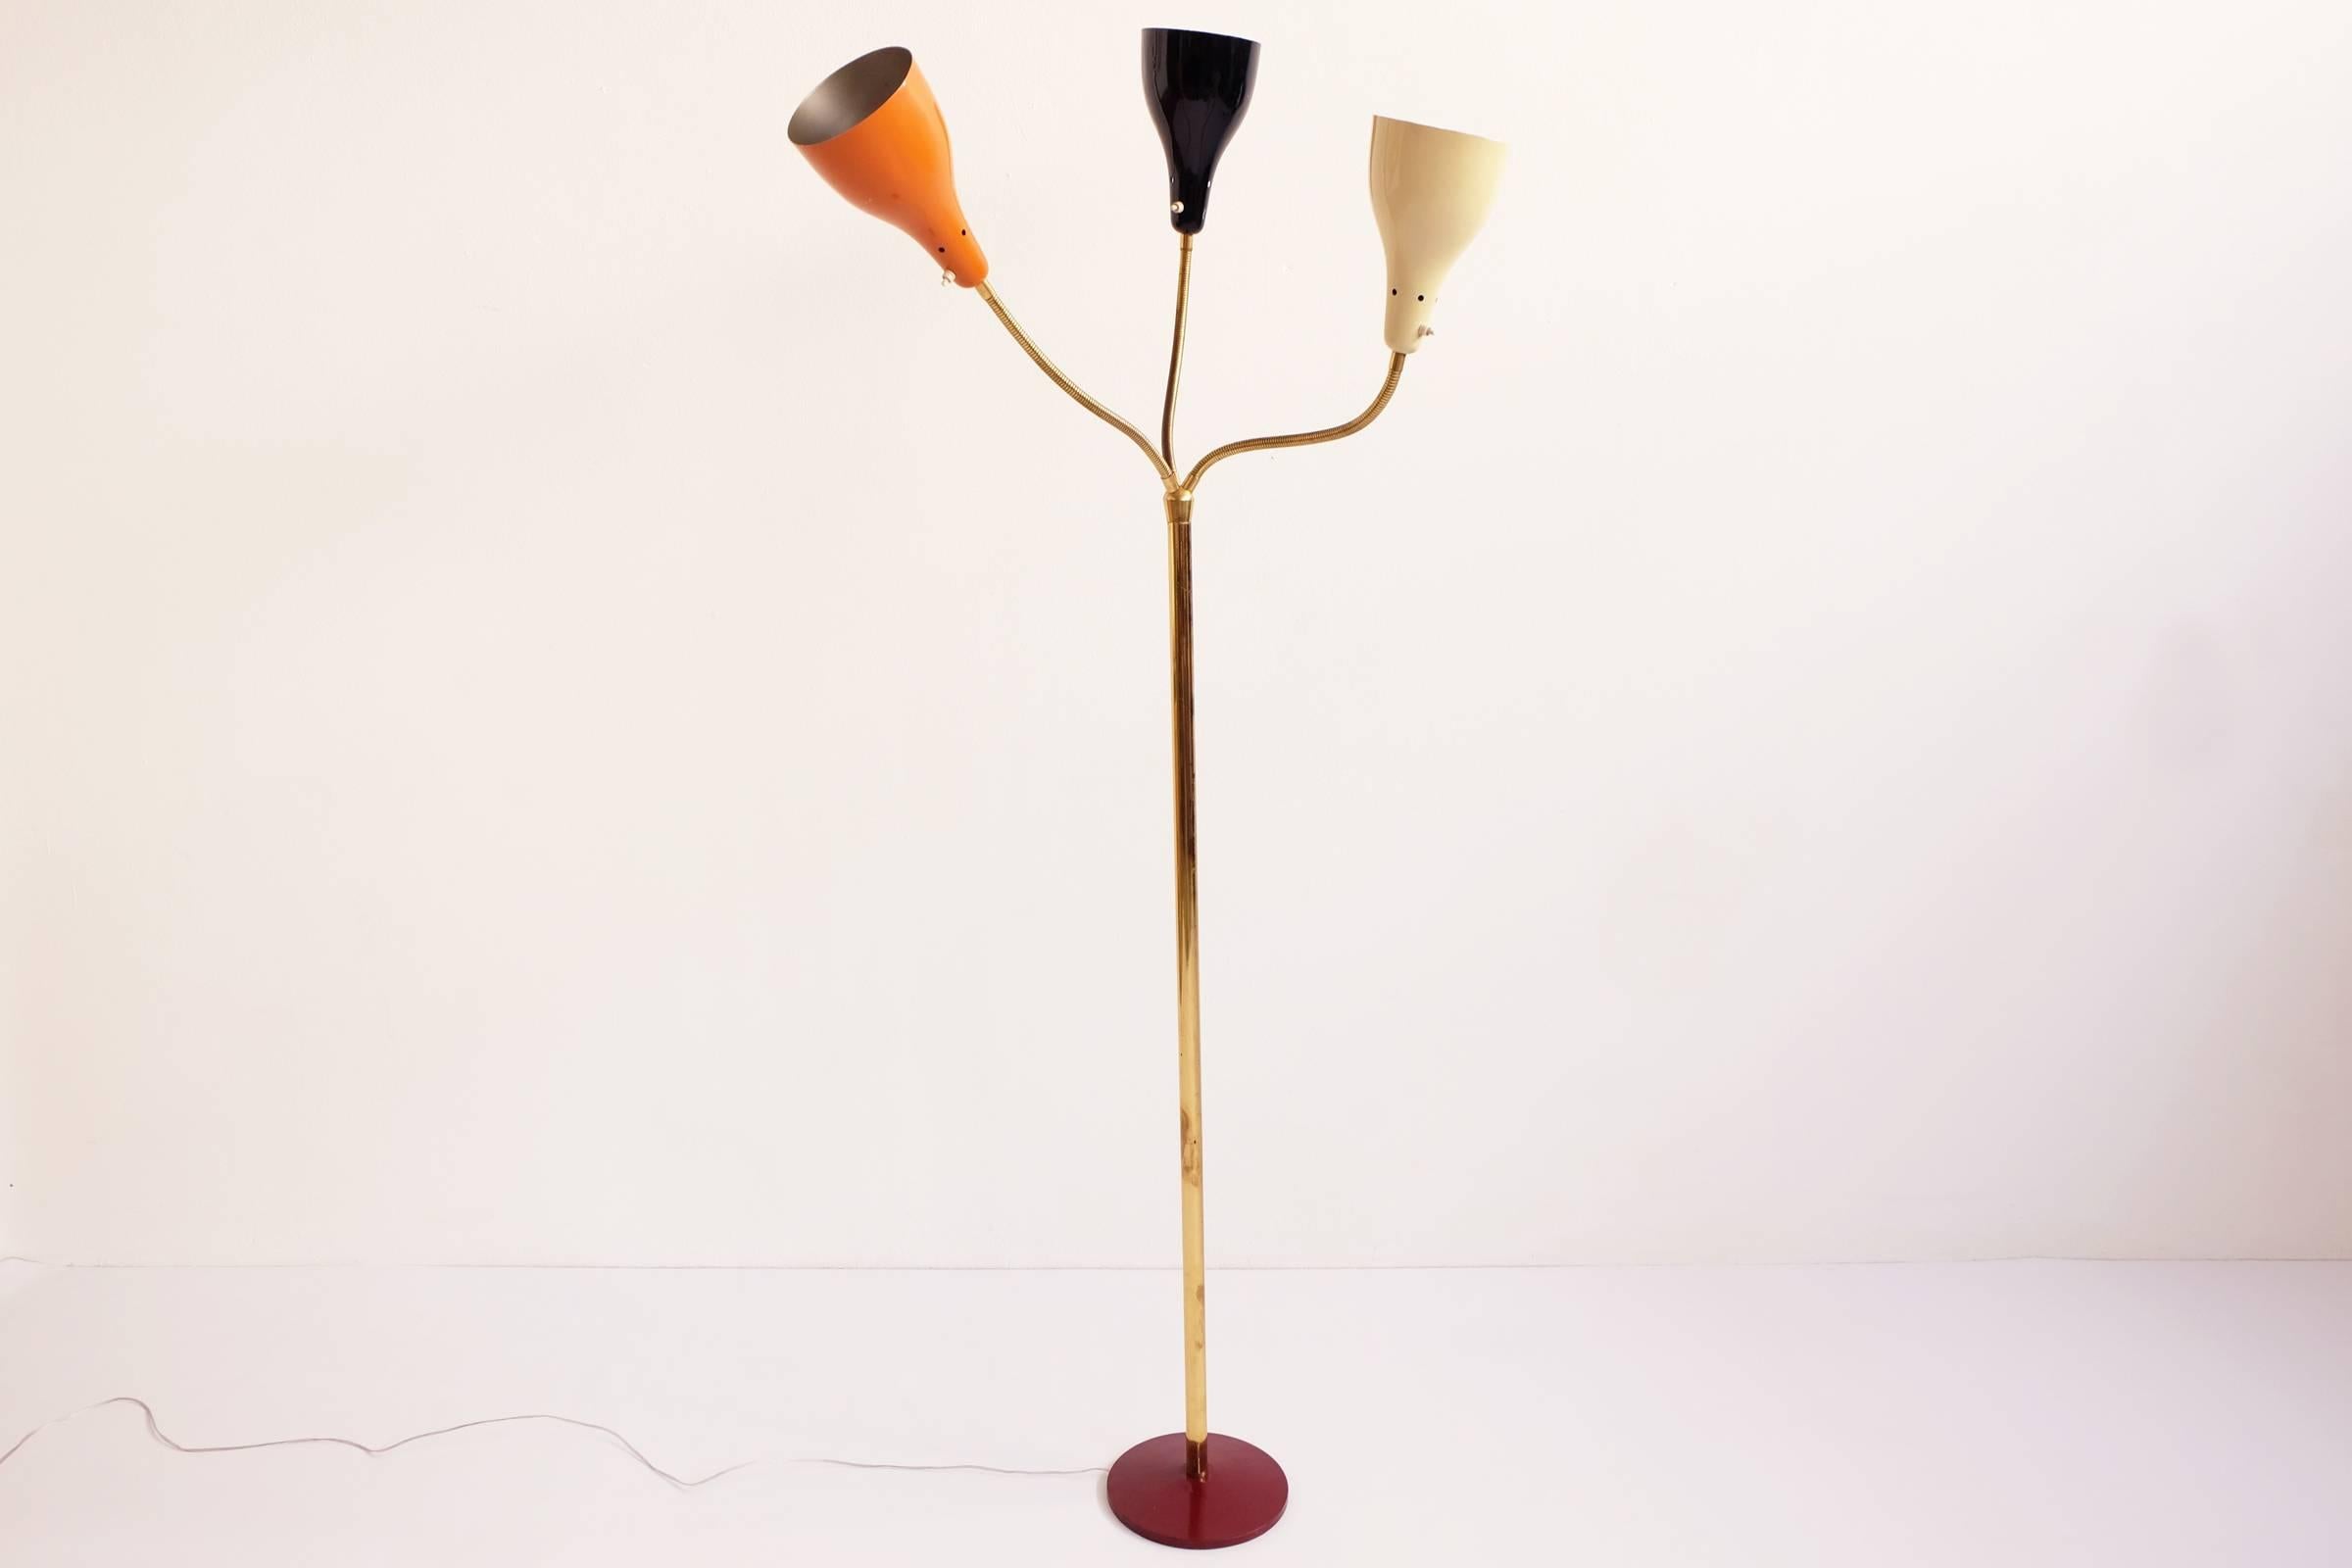 Totally original floor lamp by the Italian midcentury time, produced by O-Luce

Dimension
diameter of the base 25 cm
diameter of the shades 15 cm
Min height 142 cm
Max height 197 cm.